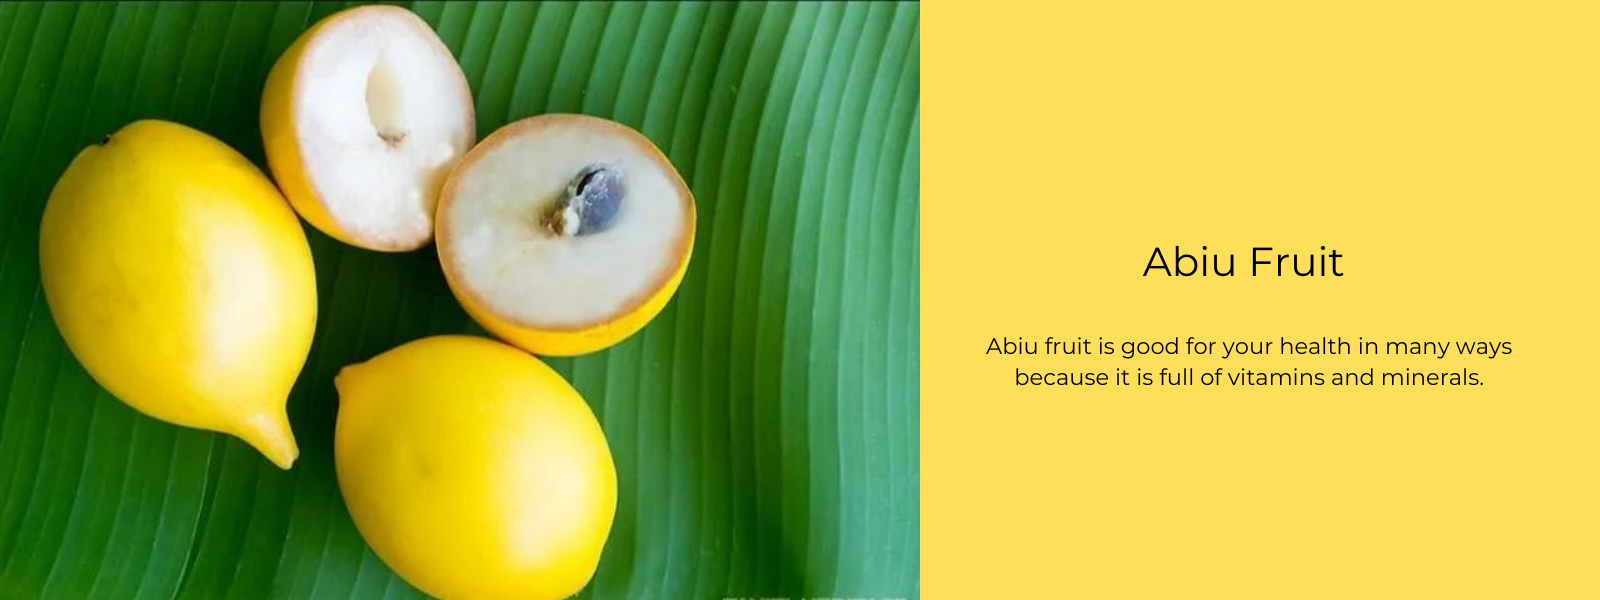 Abiu Fruit – Health Benefits, Uses and Important Facts